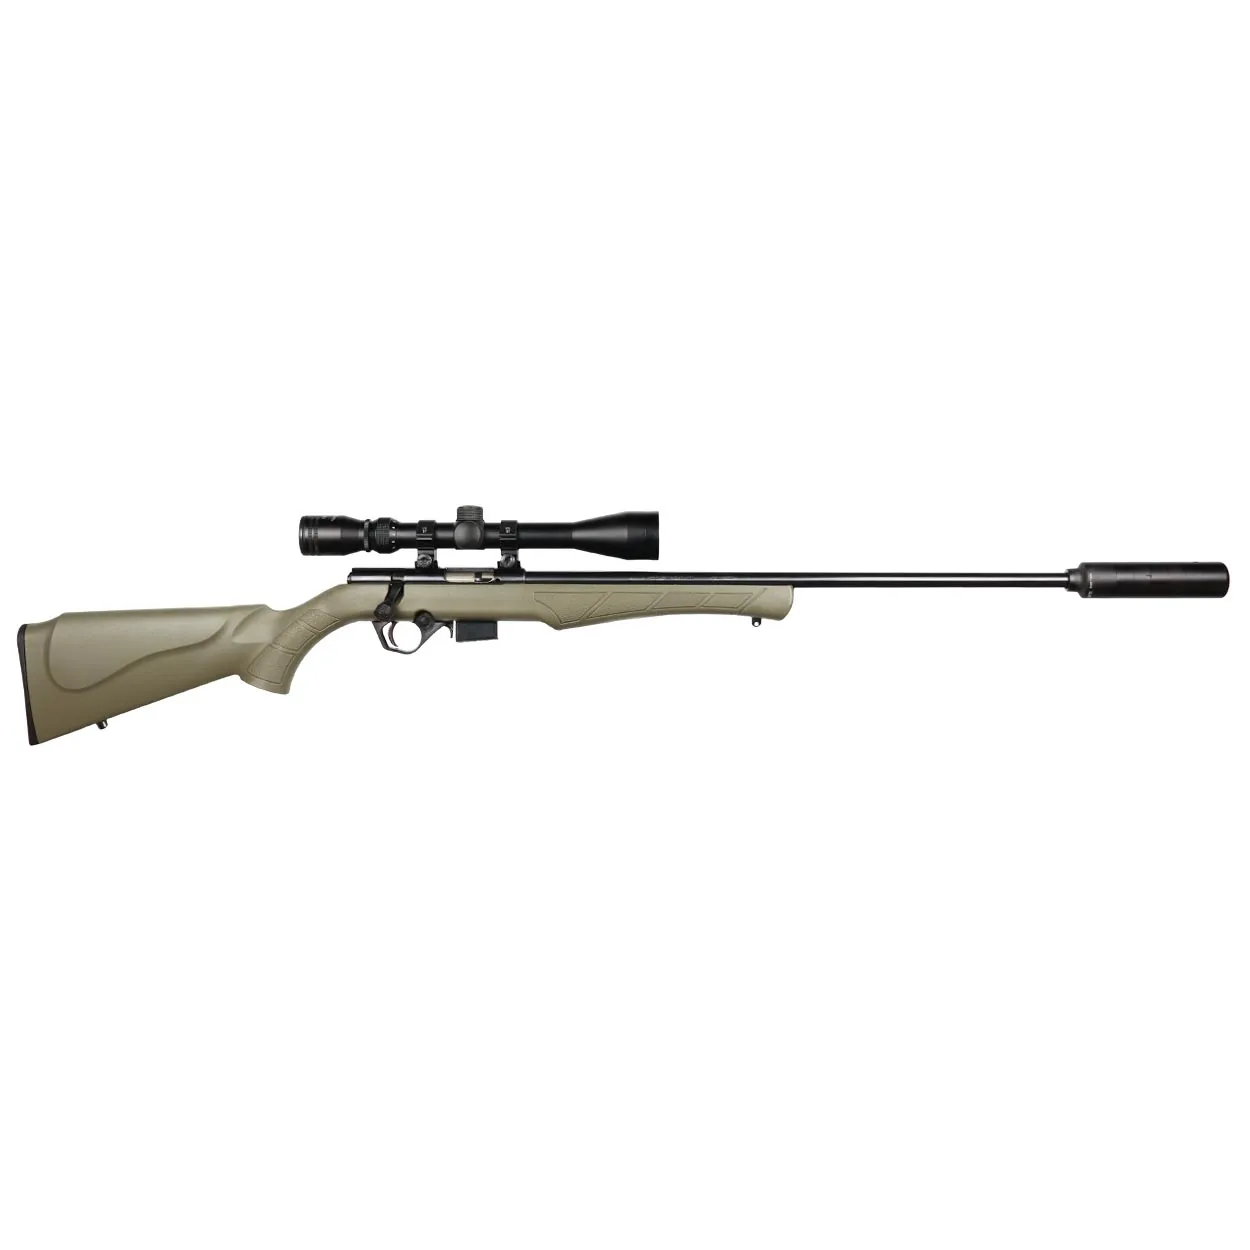 Rossi 8117 17HMR Bolt Action Package - Green includes 3-9X40 Scope & Sonic Suppressor